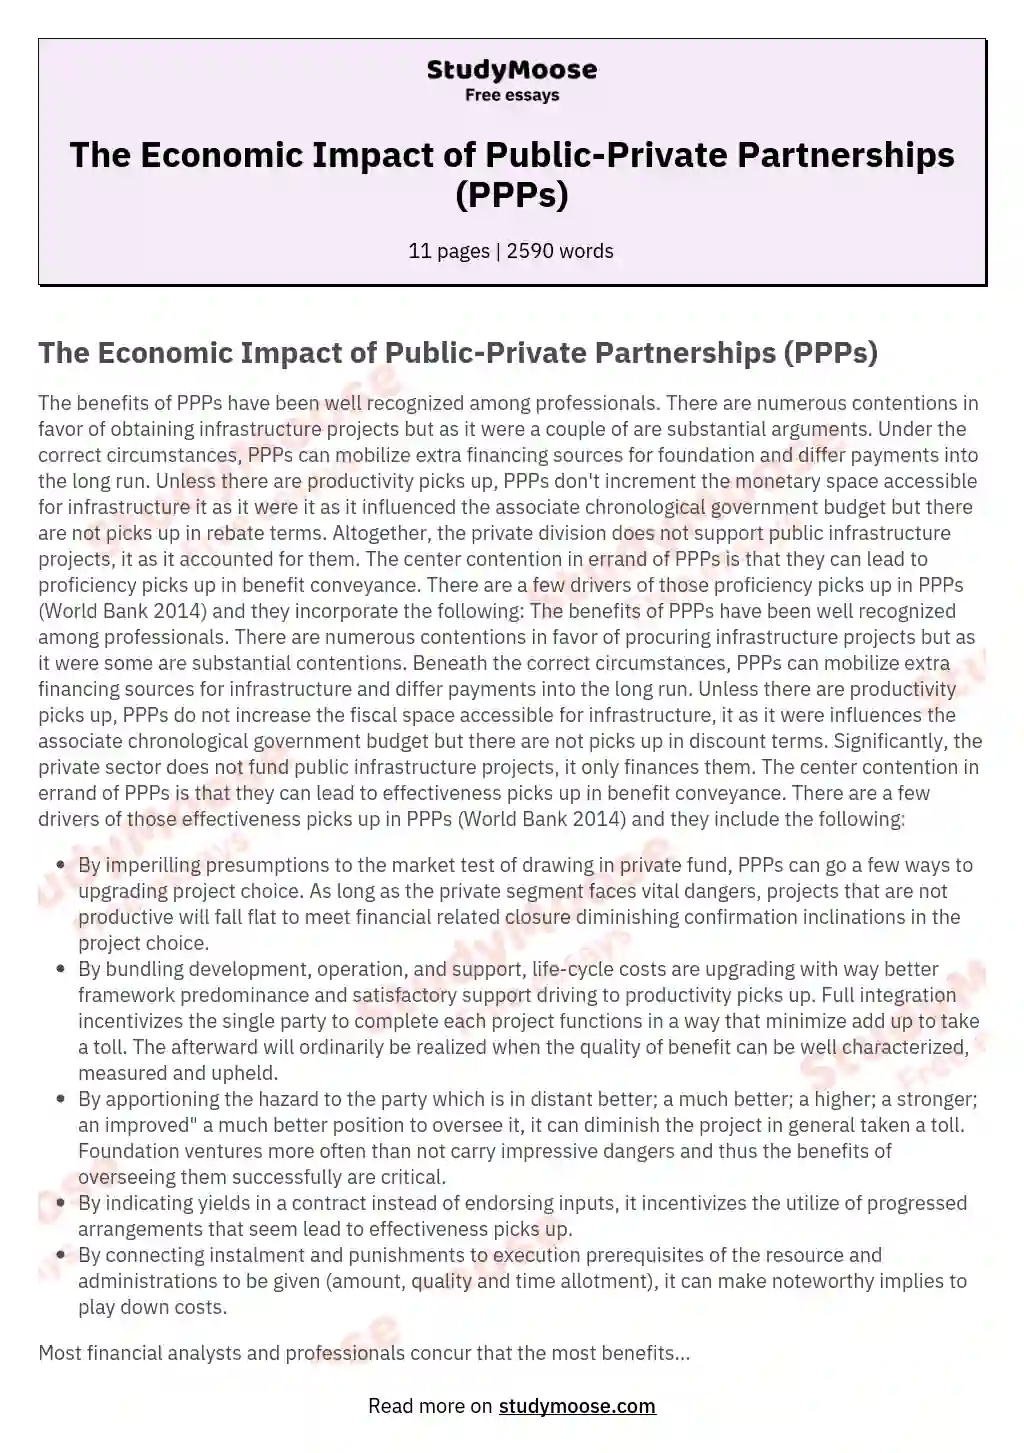 The Economic Impact of Public-Private Partnerships (PPPs) essay